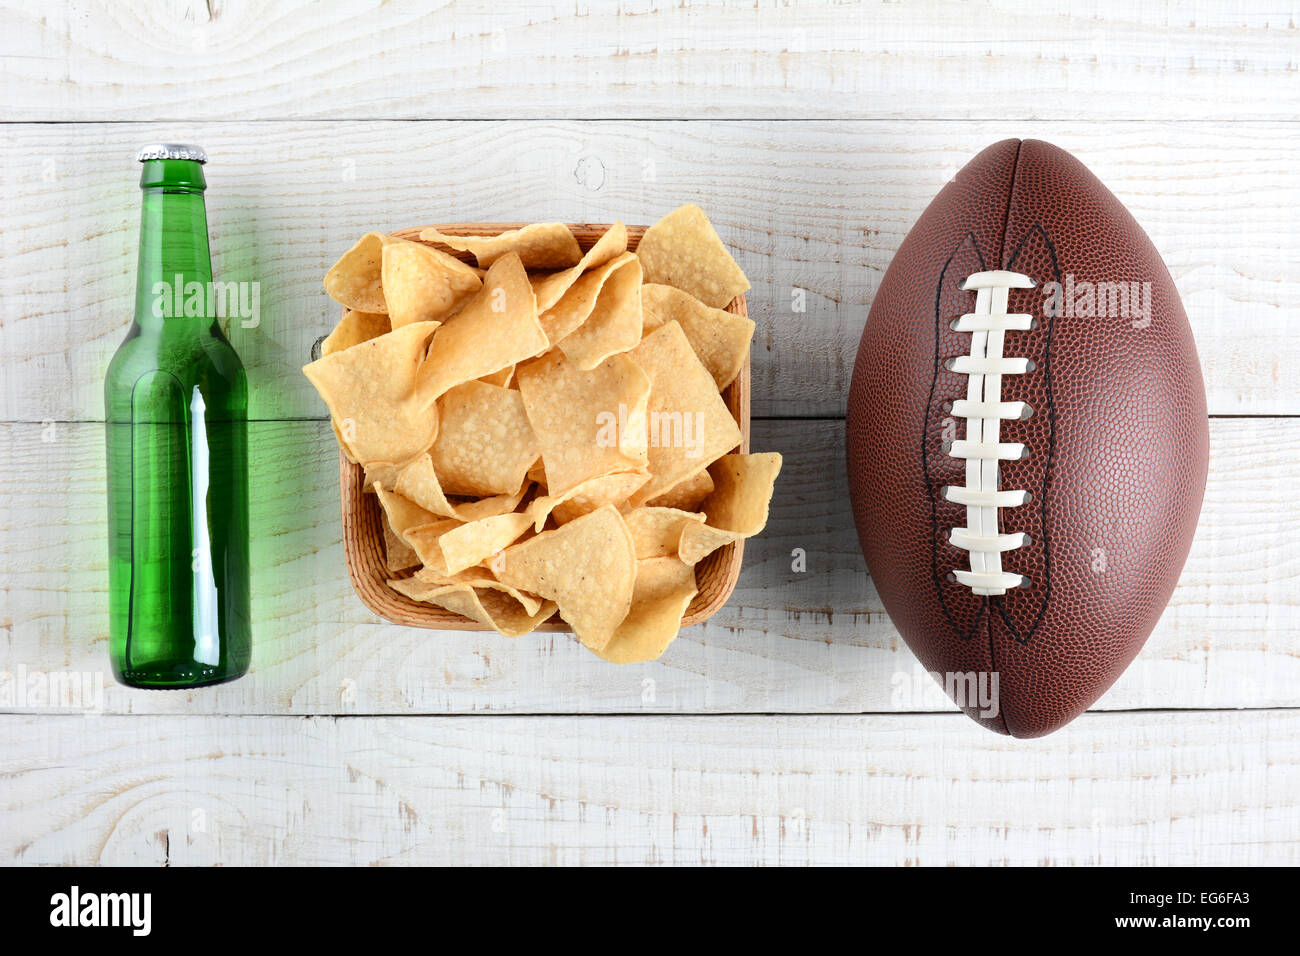 Beer bottle, bowl of chips and an American style football on a rustic whitewashed wood surface. Horizontal format. The bottle is Stock Photo